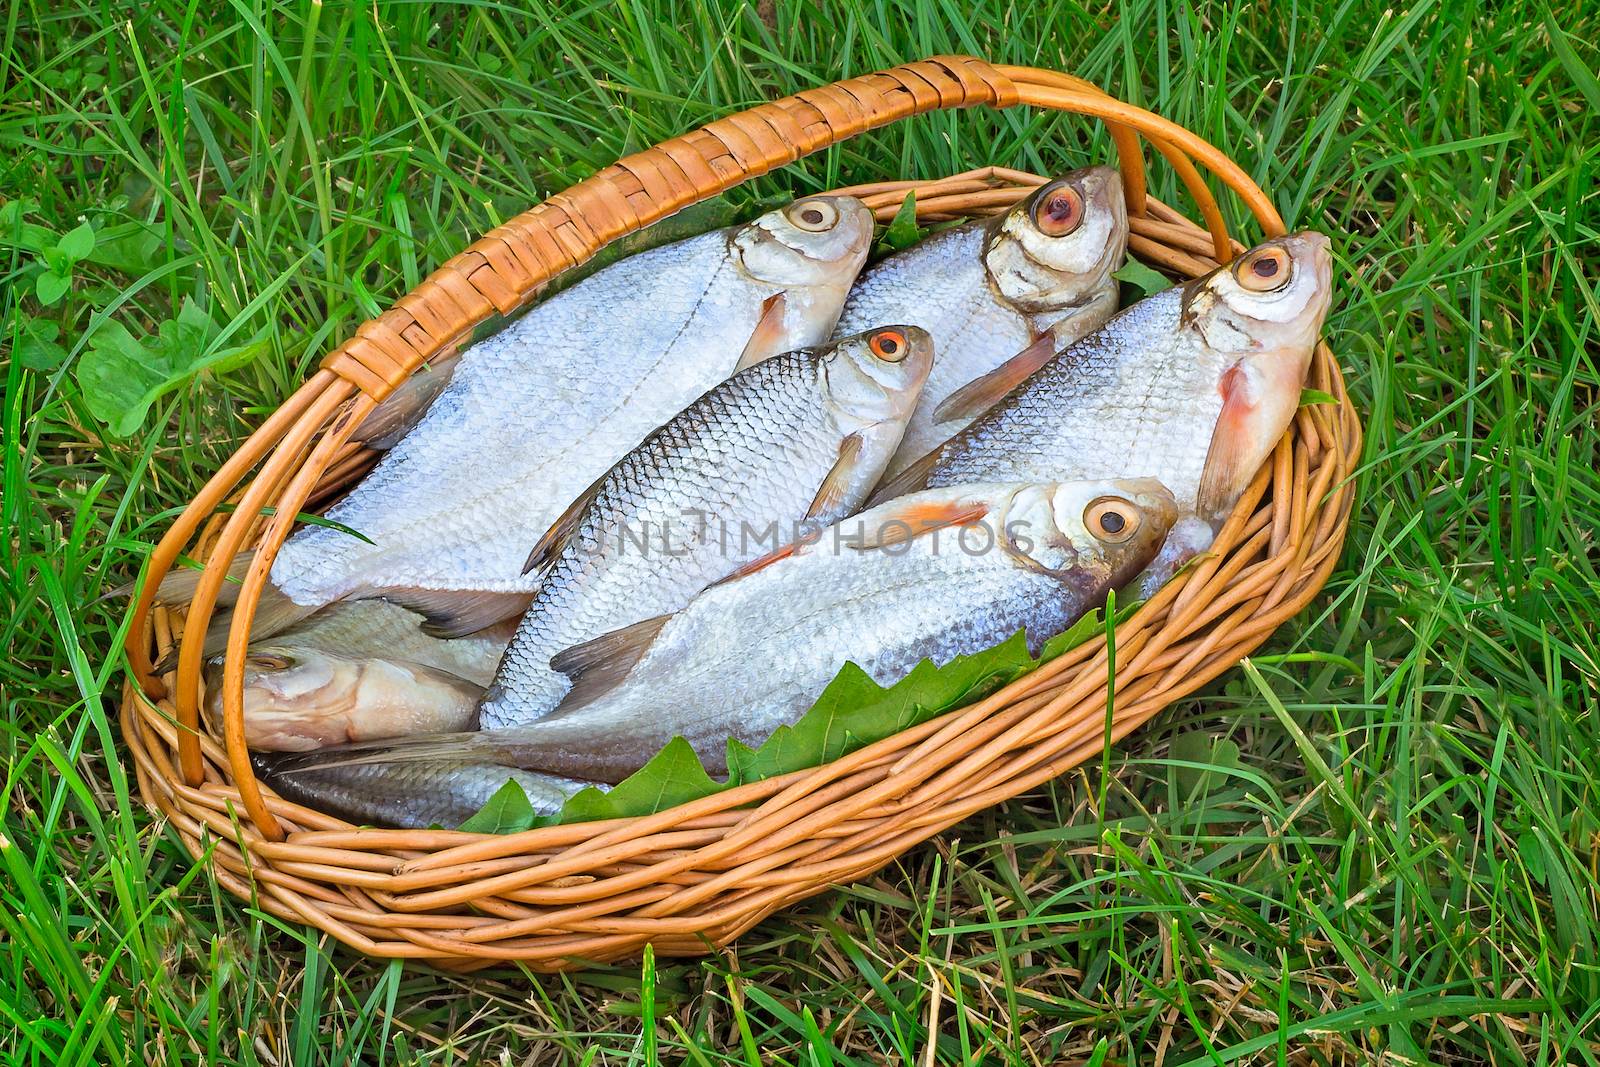 Wattled basket with the caught fish on the river bank. by georgina198